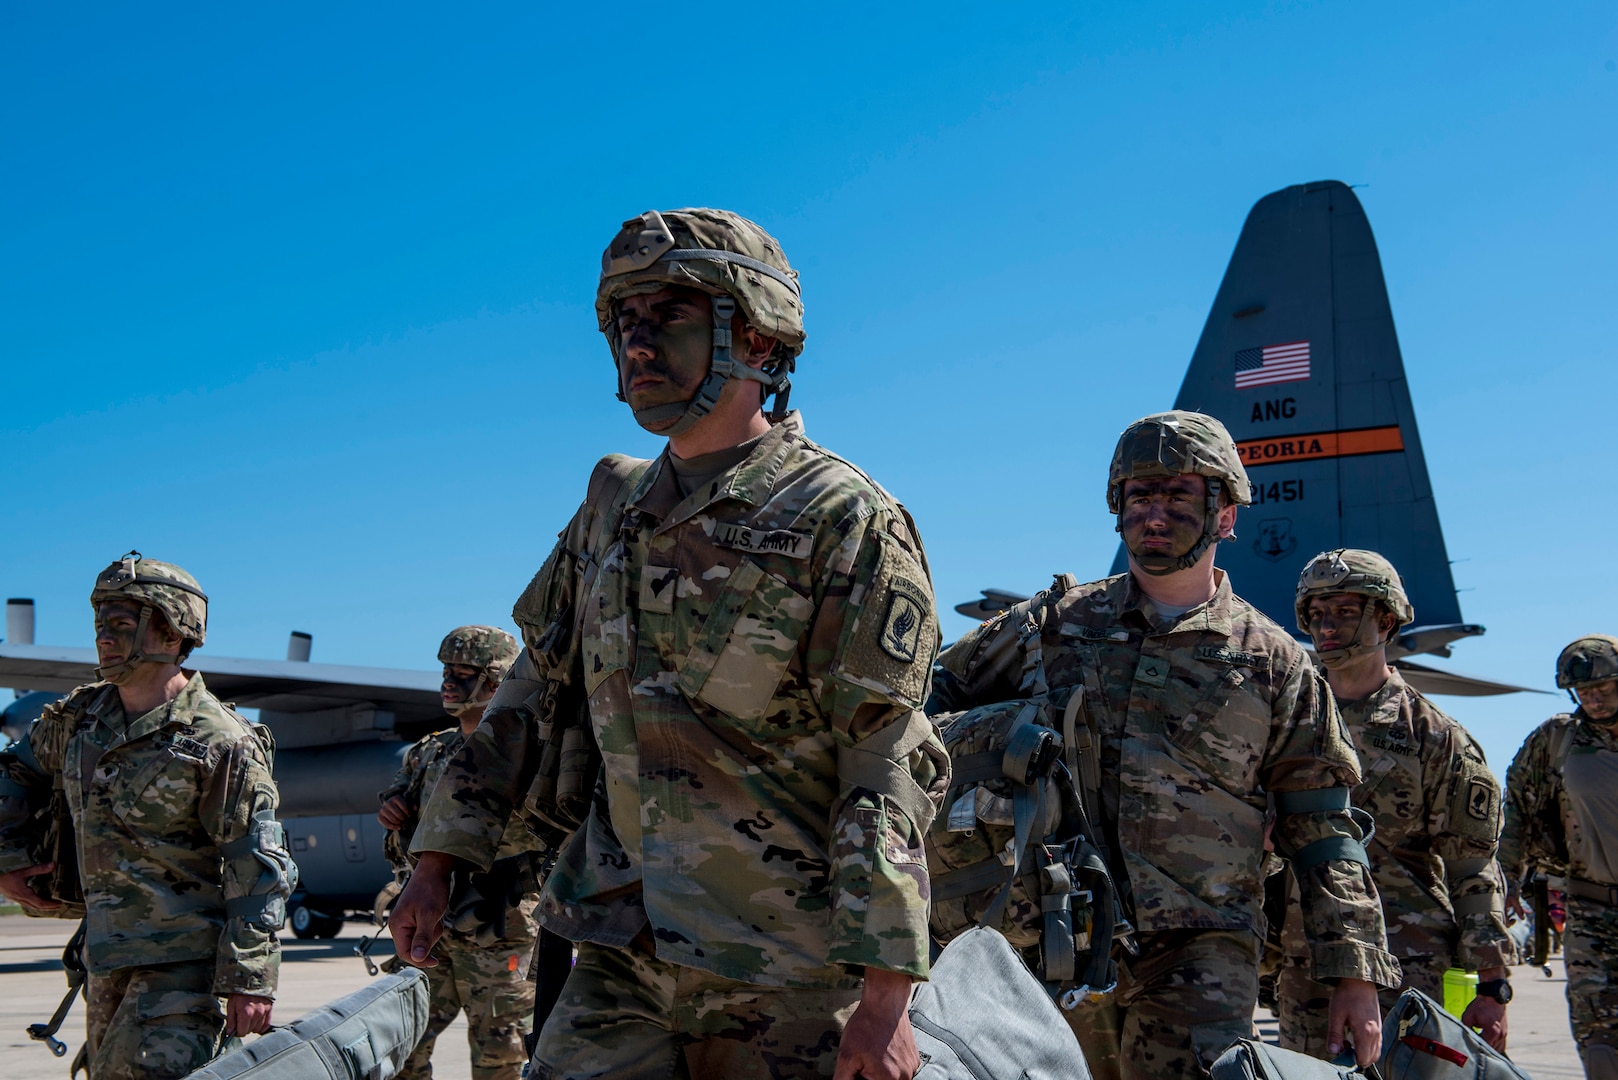 U.S. Army paratroopers from the Texas Army National Guard 1st Battalion (Airborne), 143rd Infantry Regiment, stationed at Camp Swift in Bastrop, Texas, prepare to load onto a C-130H Hercules aircraft during the Minuteman Joint Forcible Entry exercise at Naval Air Station Joint Reserve Base Fort Worth, Fort Worth, Texas, April 20, 2018.